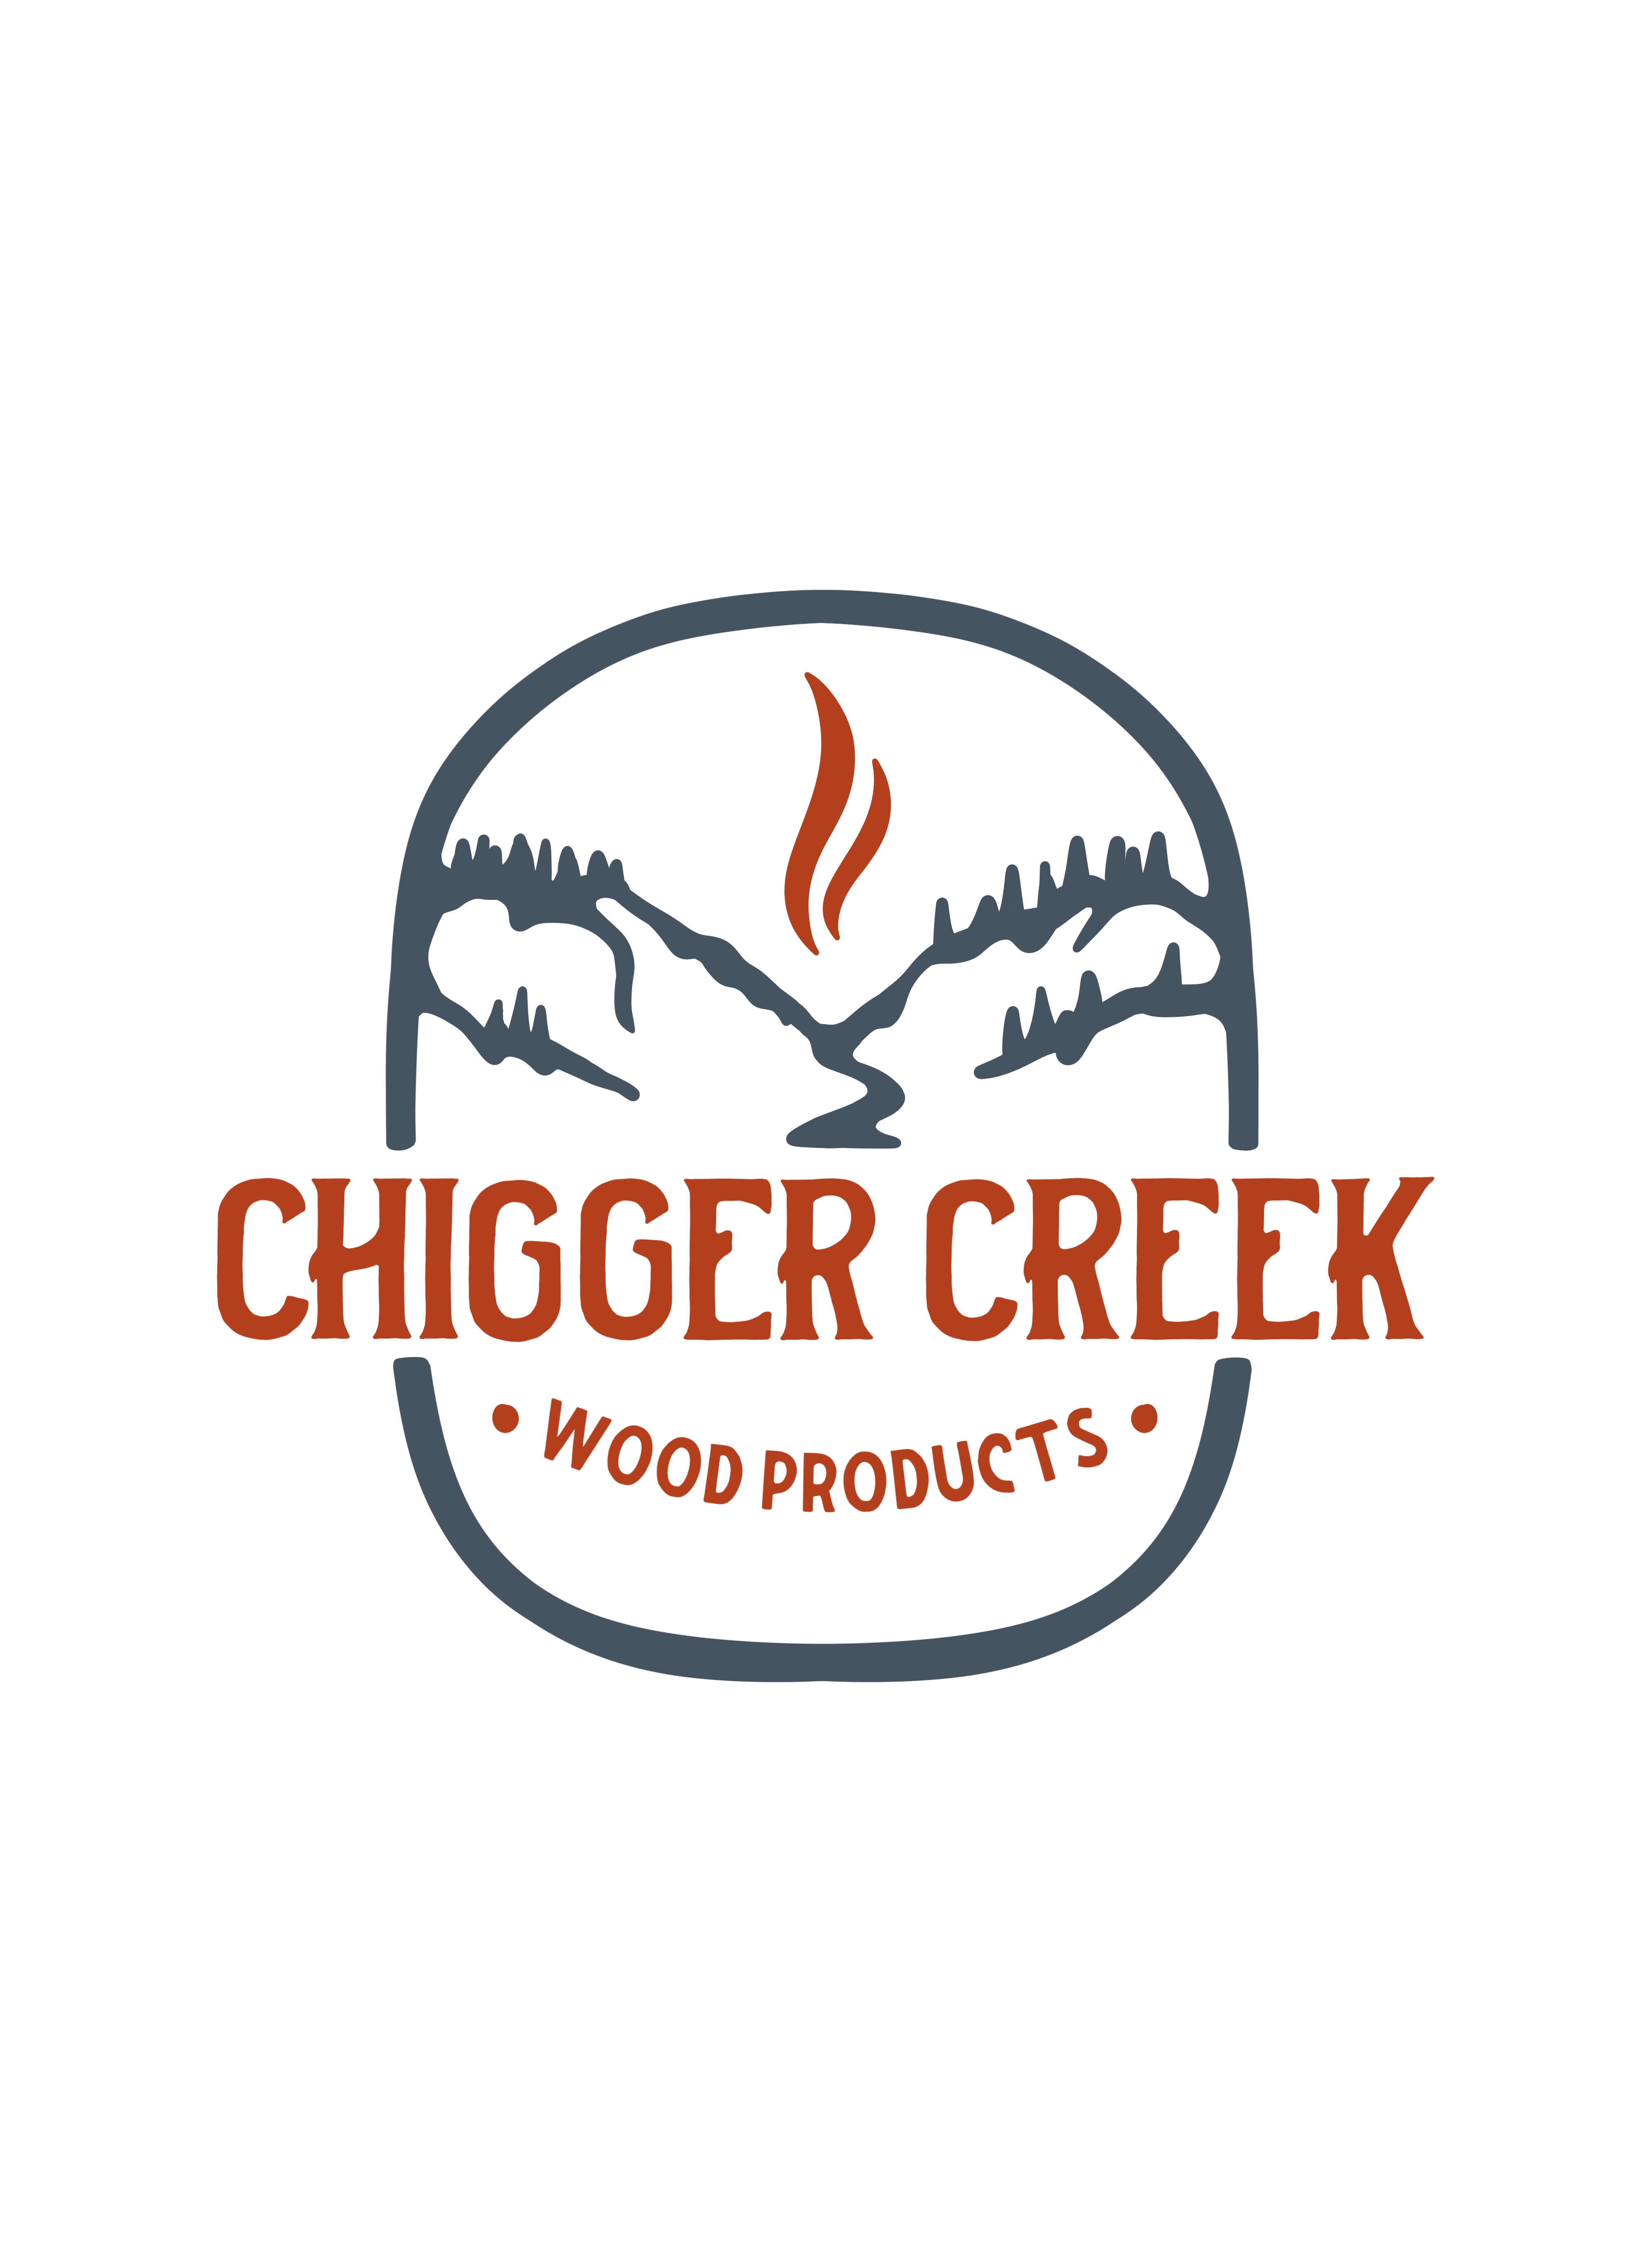 About Us - Chigger Creek Wood Products